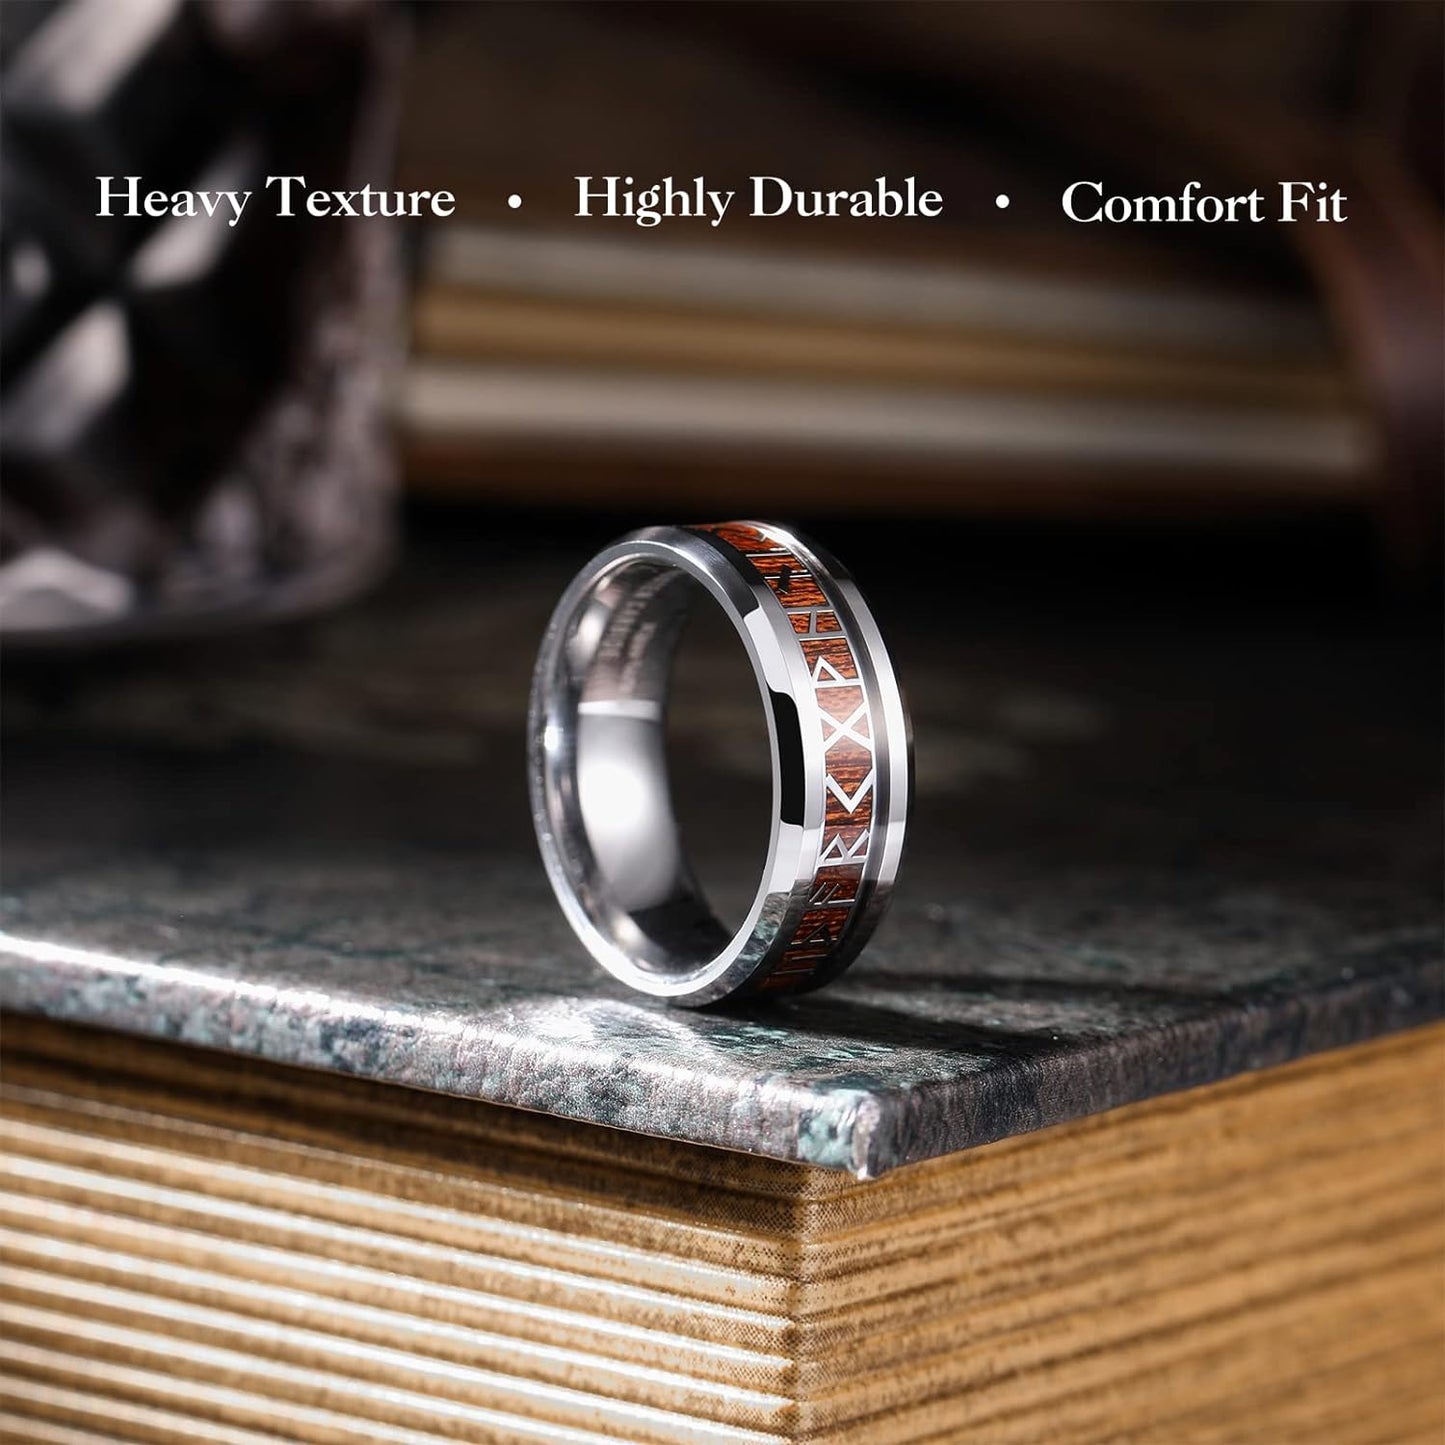 King Will Tungsten Carbide Wedding Band for Men - 8mm Black Plated High Polished Inlay Norse Viking Rune Rings for Any Ocassion Ring Comfort Fit